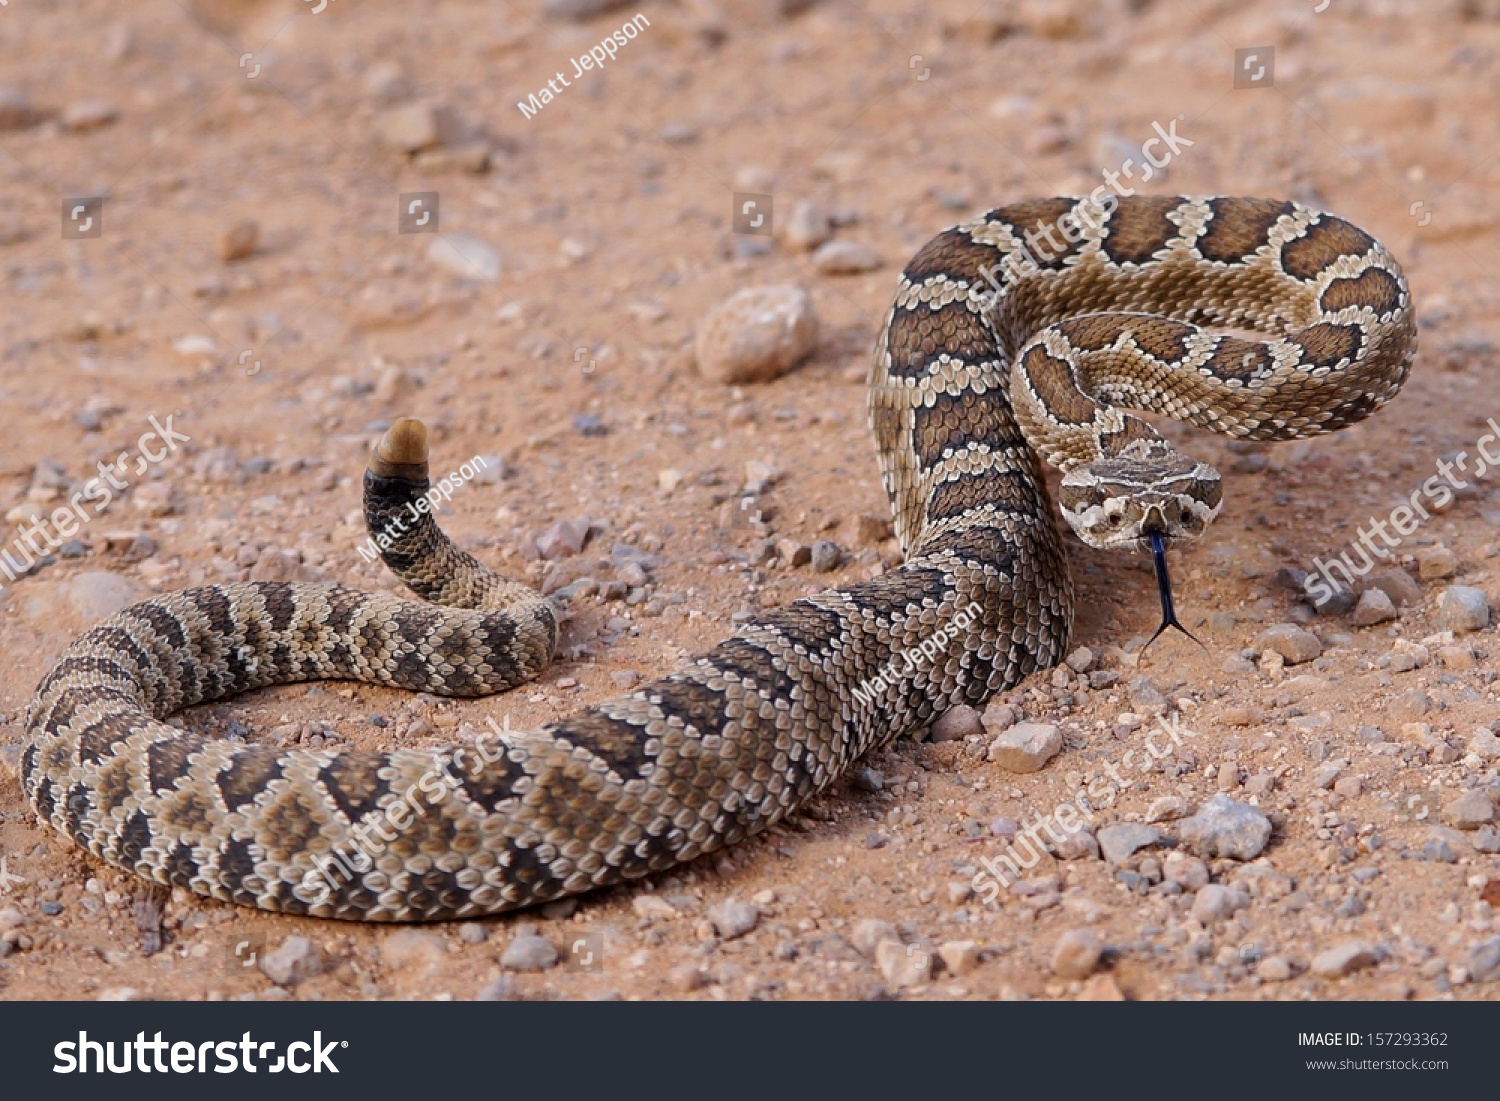 Dangerous rattle snake, coiled and ready to strike - Great Basin Rattlesnake, Crotalus oreganus lutosus  #157293362